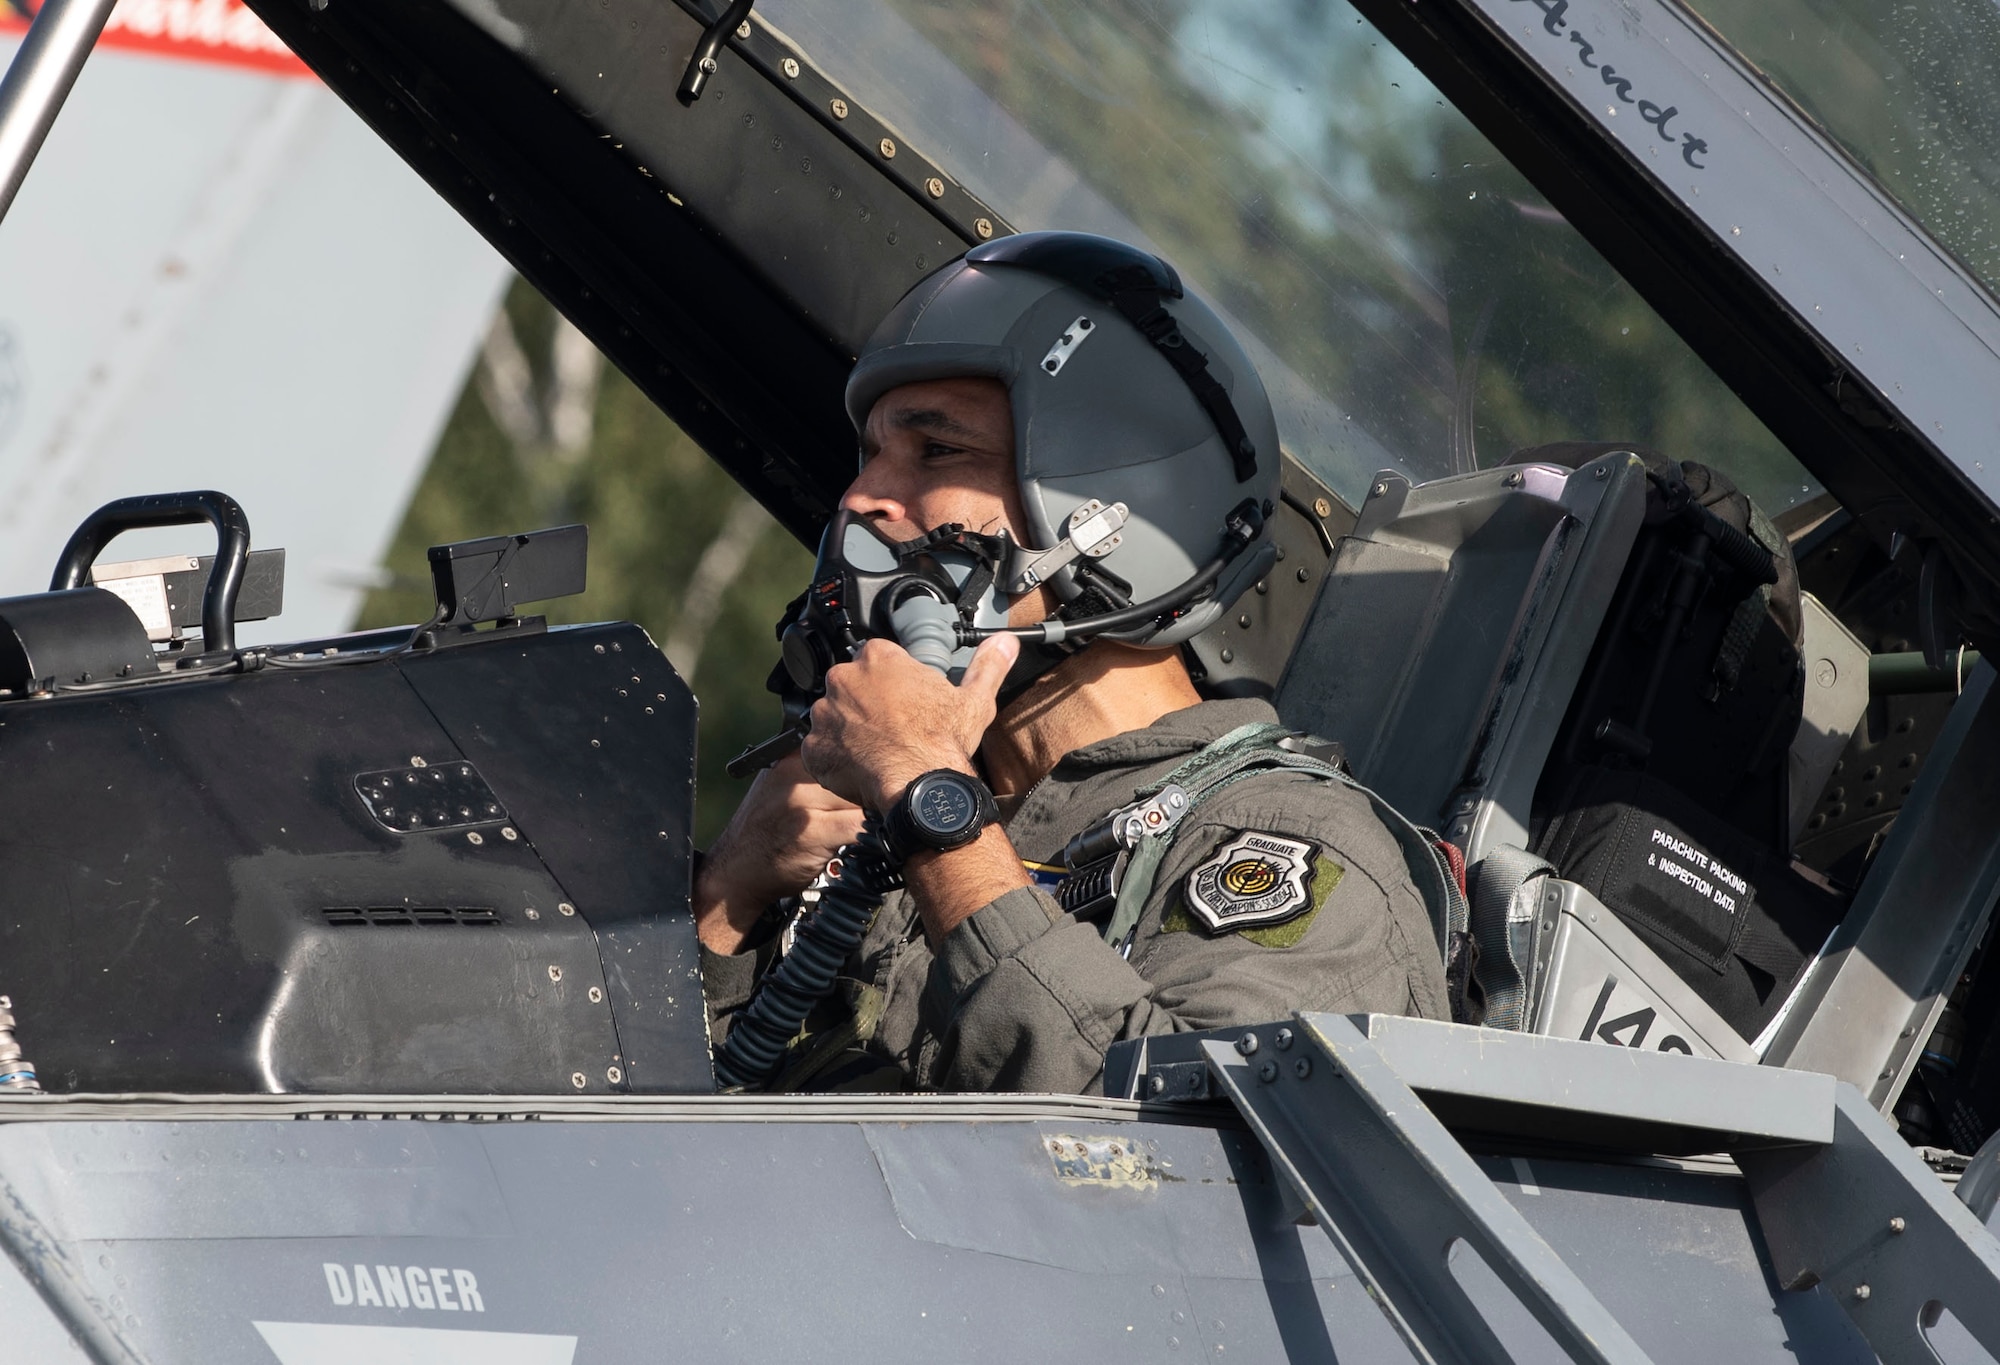 U.S. Air Force Brig. Gen. Adrian Spain, United States Air Forces in Europe and Air Forces Africa director of plans, programs and analyses, gears up for a flight, August 25, 2020, at Łask AB, Poland. Participation in the Aviation Detachment Rotation 20.4 is one of several ways the U.S. continues to strengthen partnerships, ensure transatlantic security and NATO unity. (U.S. Air Force photo by Senior Airman Melody W. Howley)